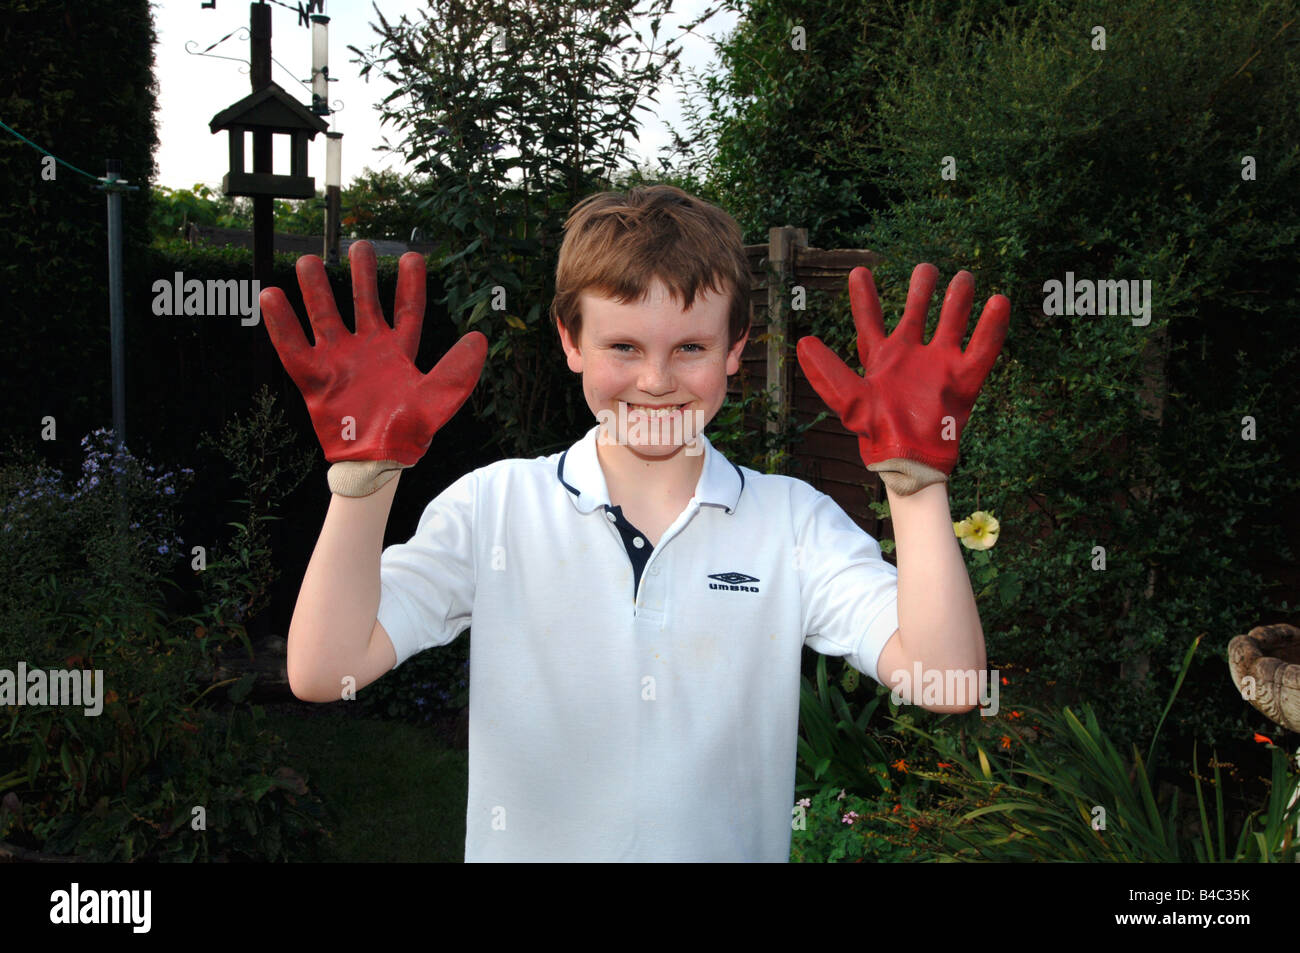 A 13yr Old Boy Wearing Red Rubber Gardening Gloves . Stock Photo